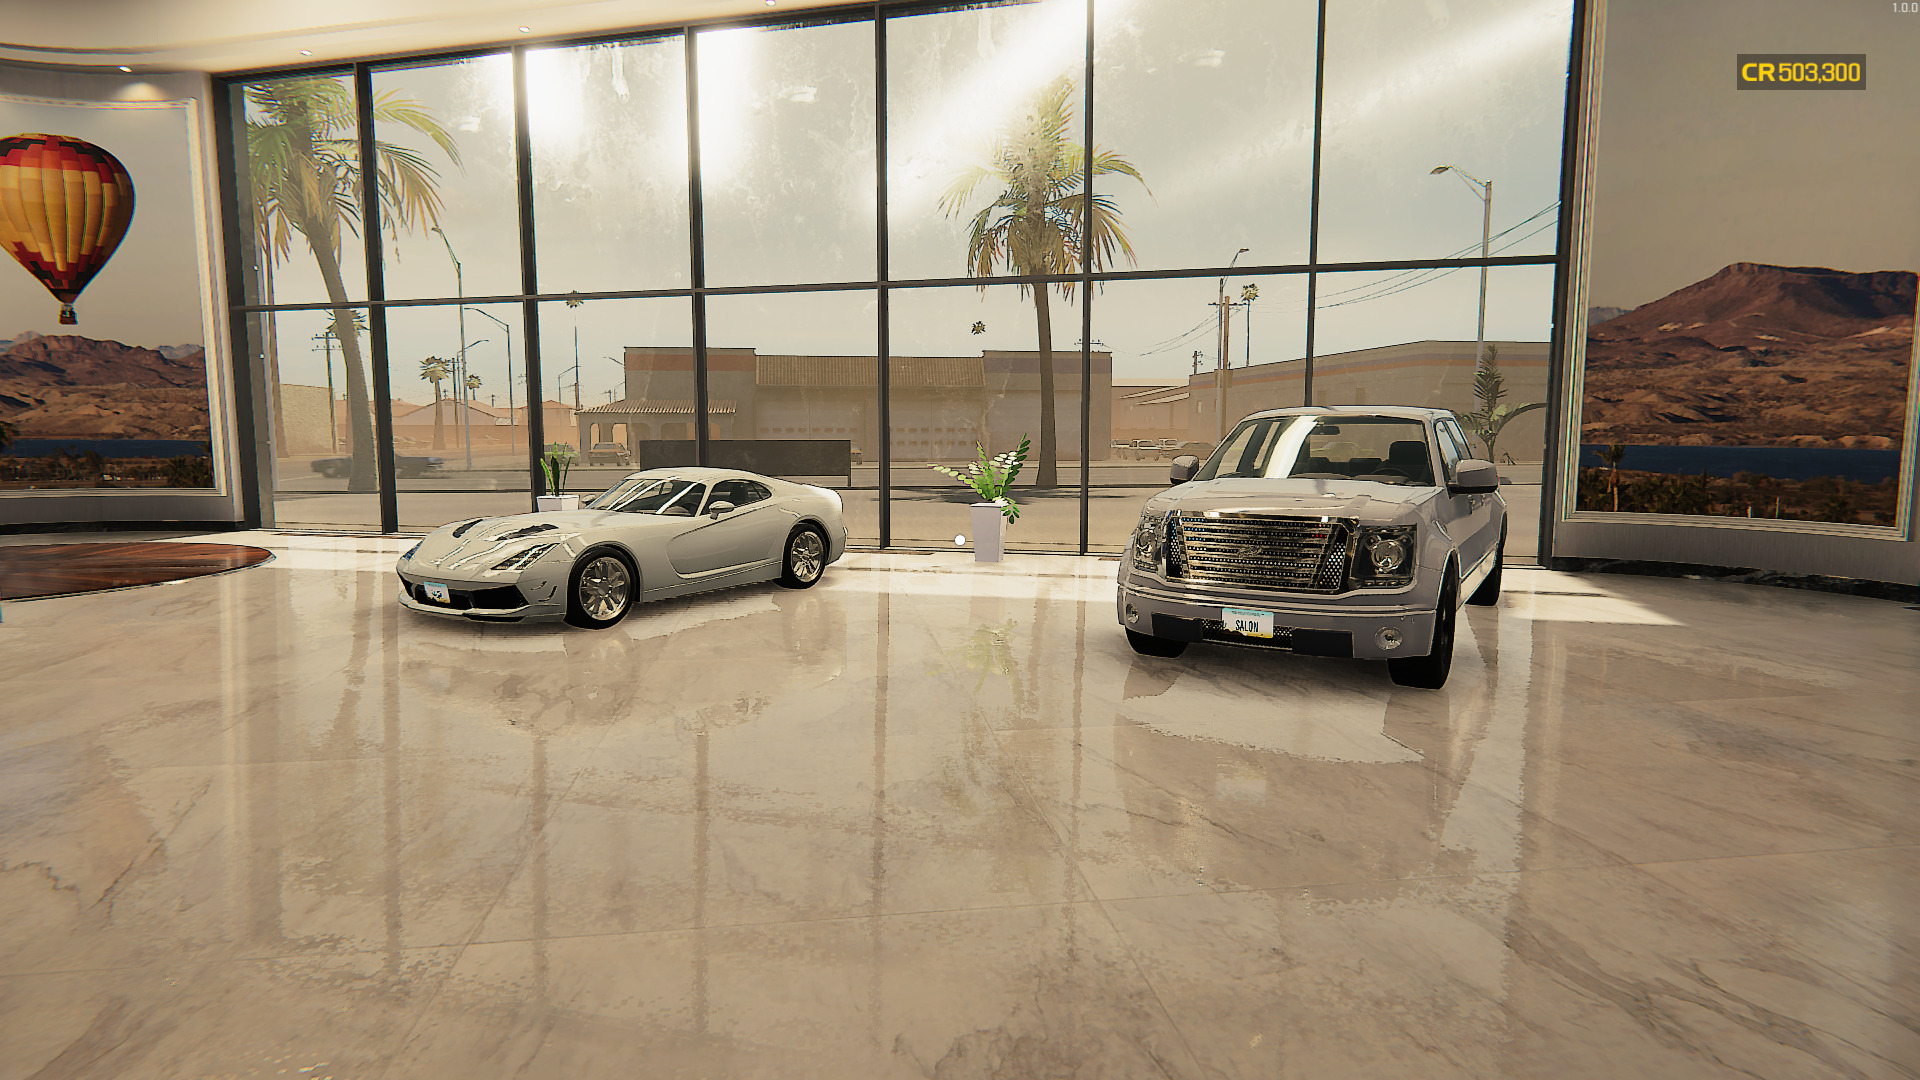 You can buy brand new cars from the Car Salon in Car Mechanic Simulator. 